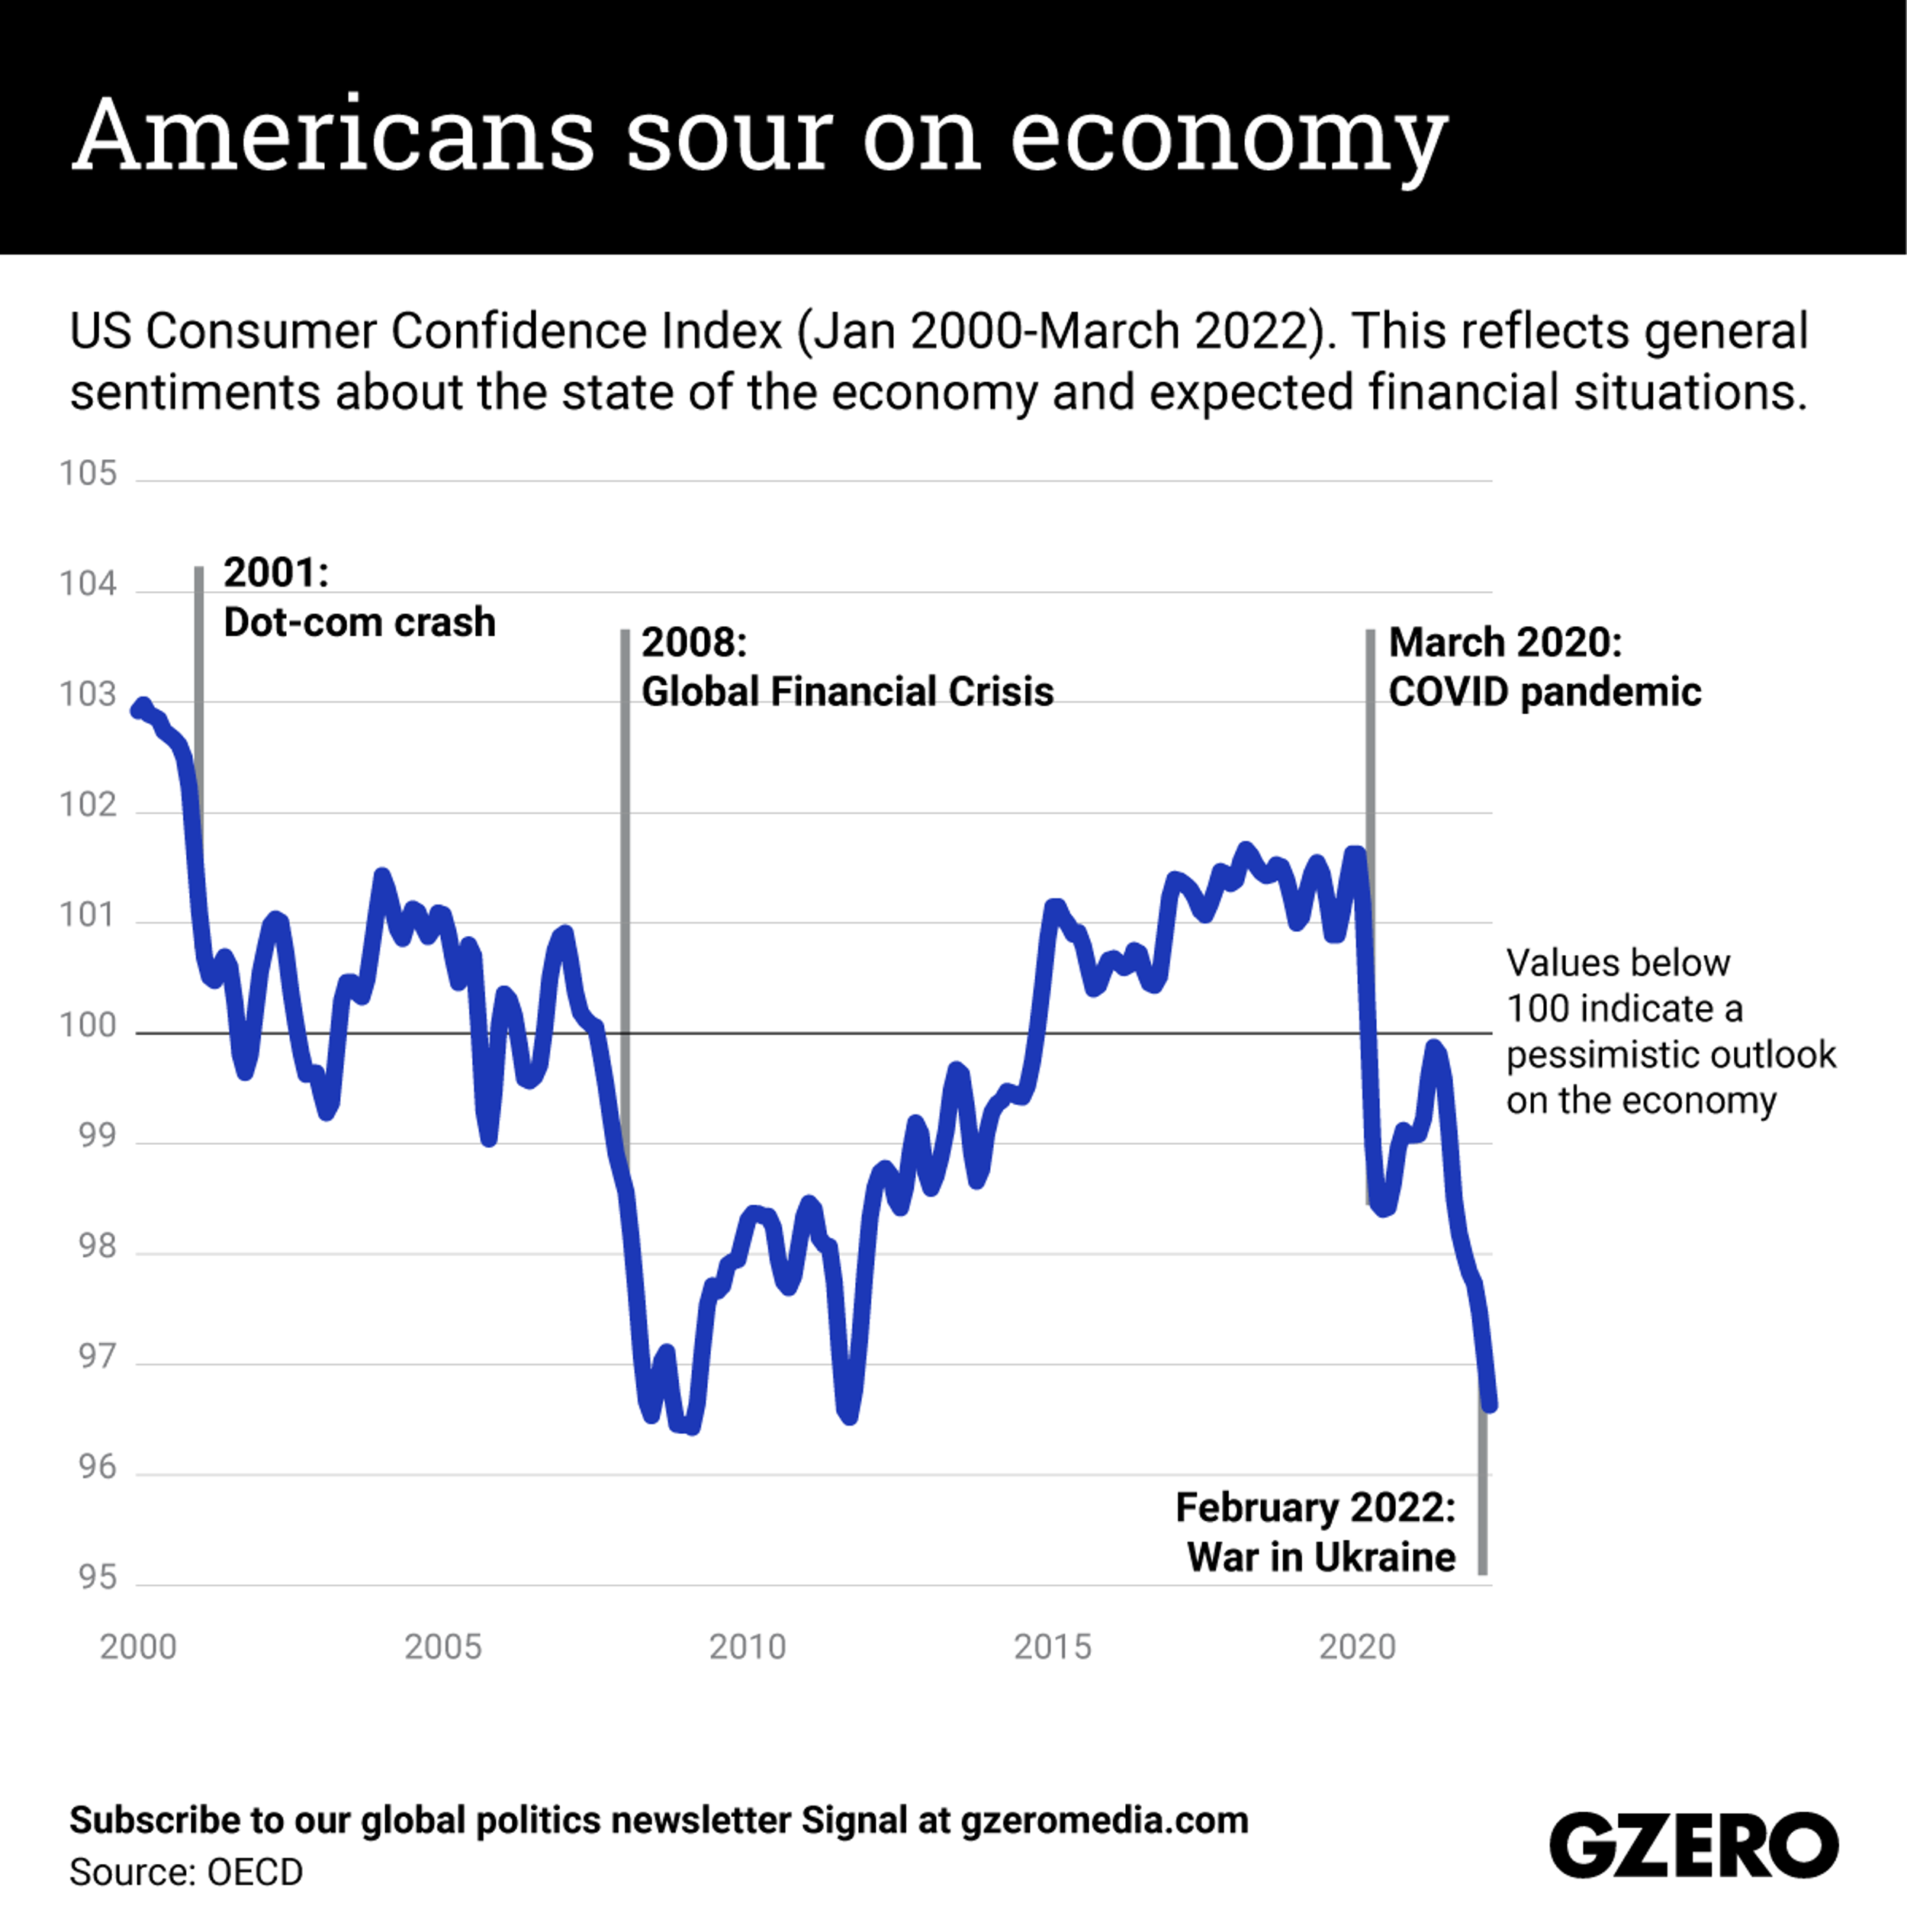 The Graphic Truth: Americans sour on economy